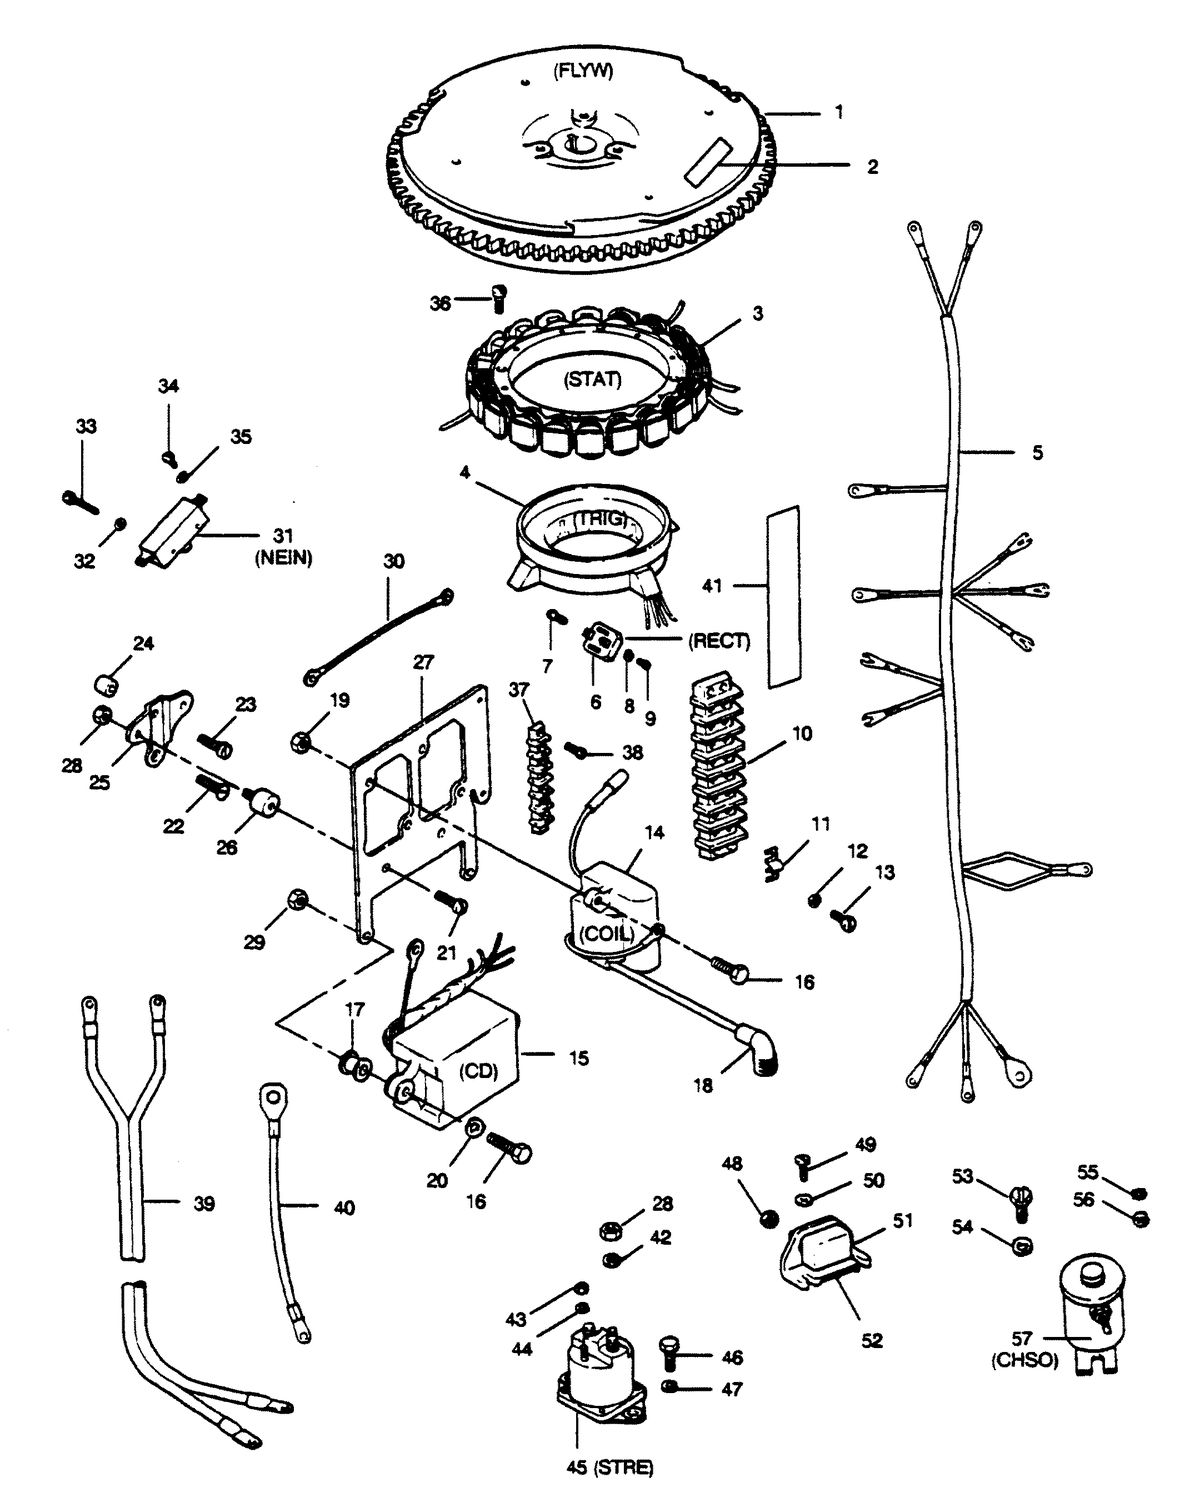 FORCE FORCE 1989 50 H.P. "C" MODELS ELECTRICAL COMPONENTS